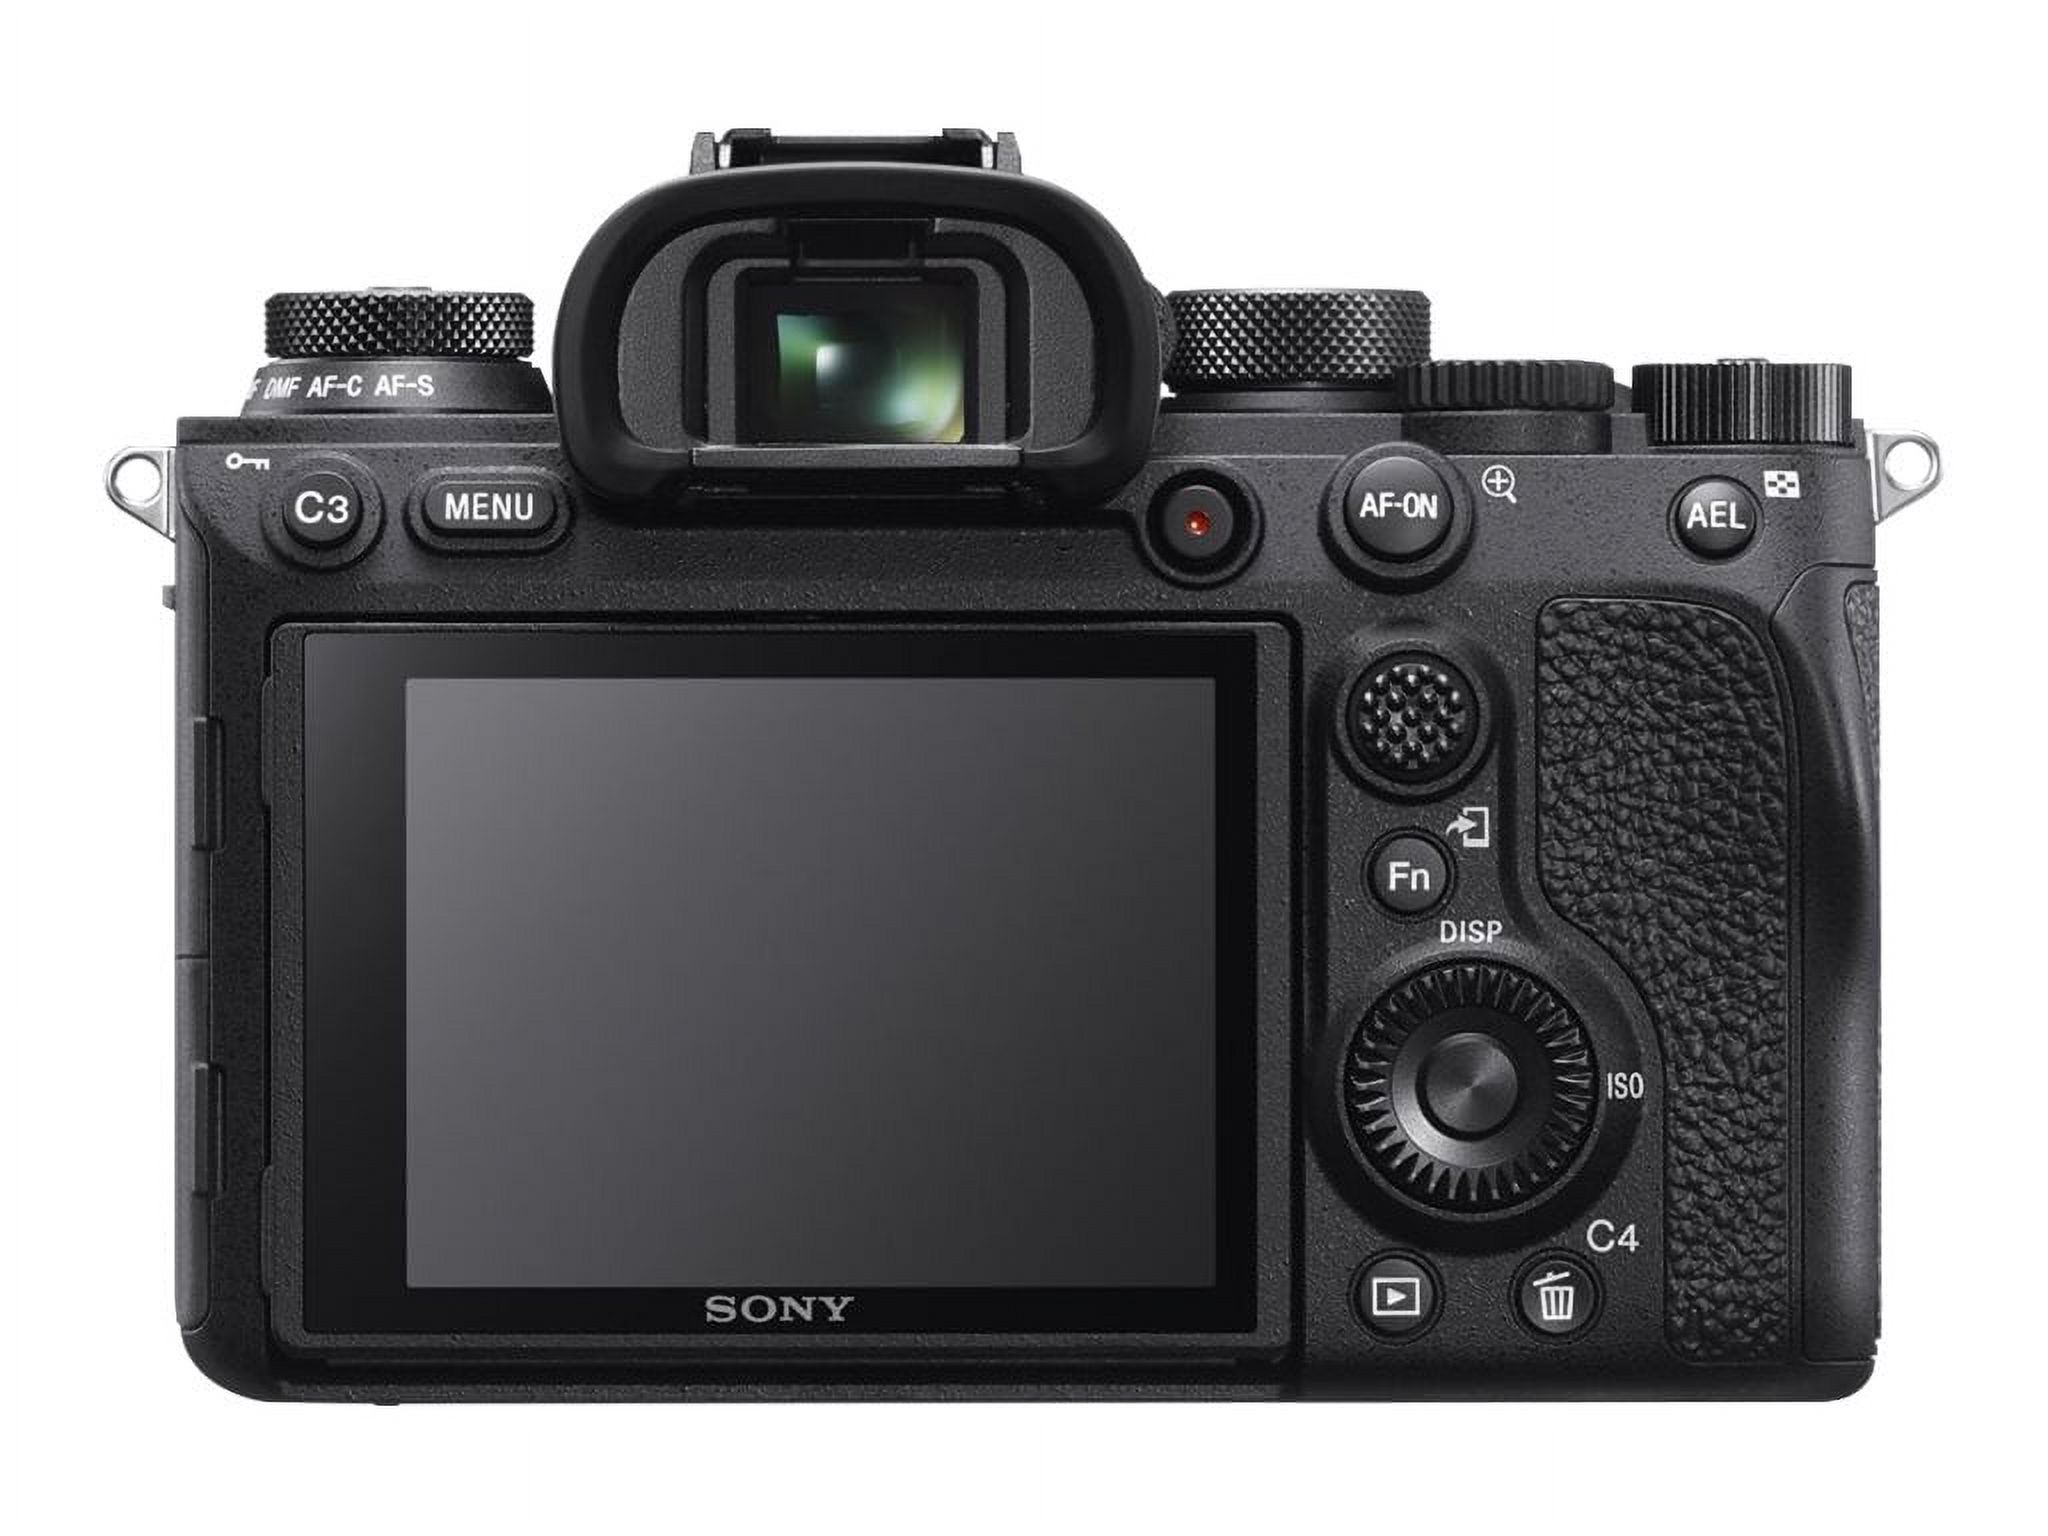 Sony a9 II ILCE-9M2 - Digital camera - mirrorless - 24.2 MP - Full Frame - 4K / 30 fps - body only - NFC, Wi-Fi, Bluetooth - black - image 4 of 14